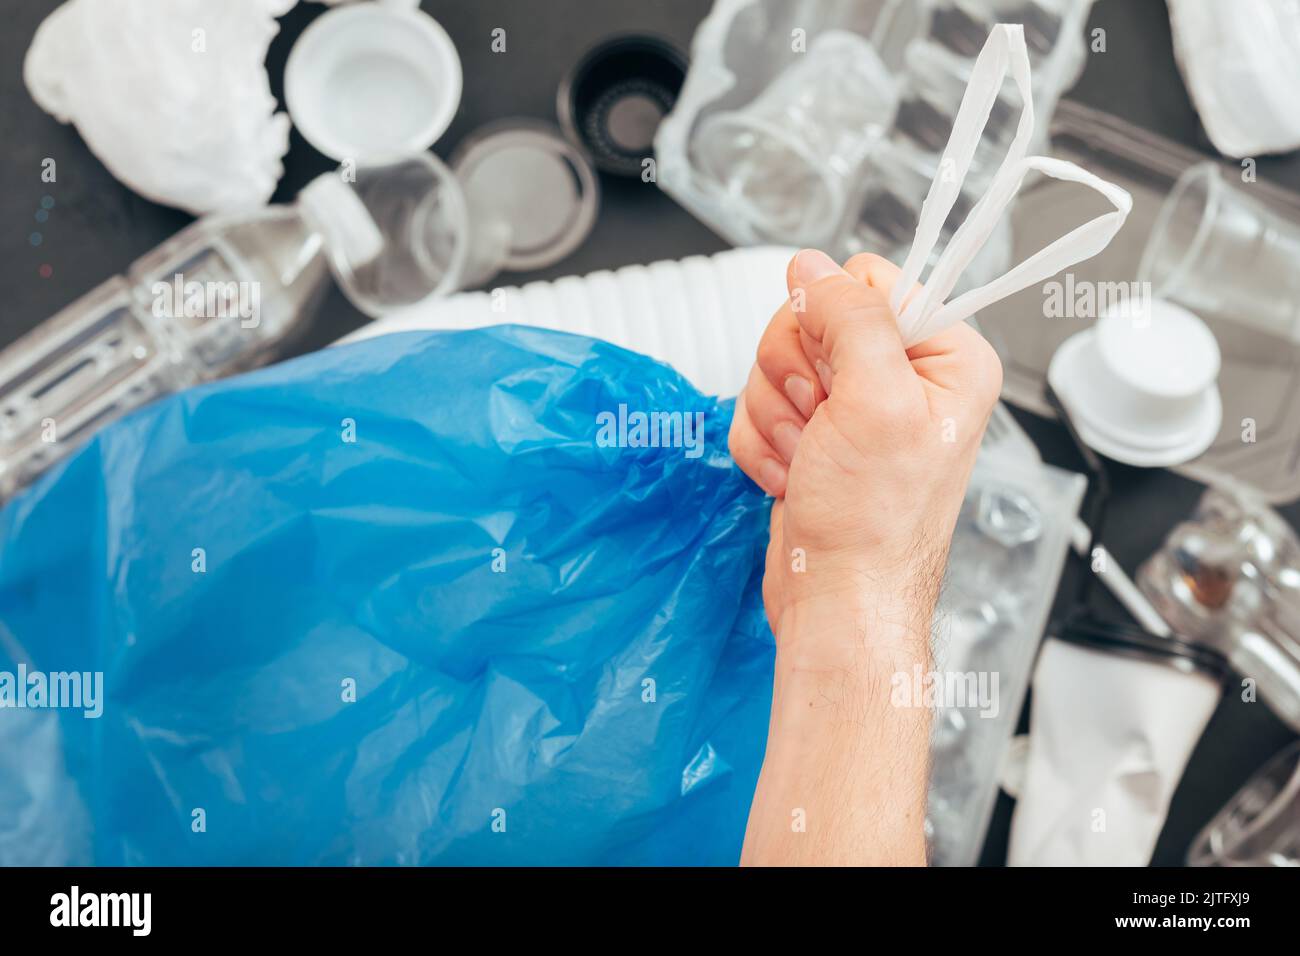 ecology plastic free life earth pollution recycle Stock Photo